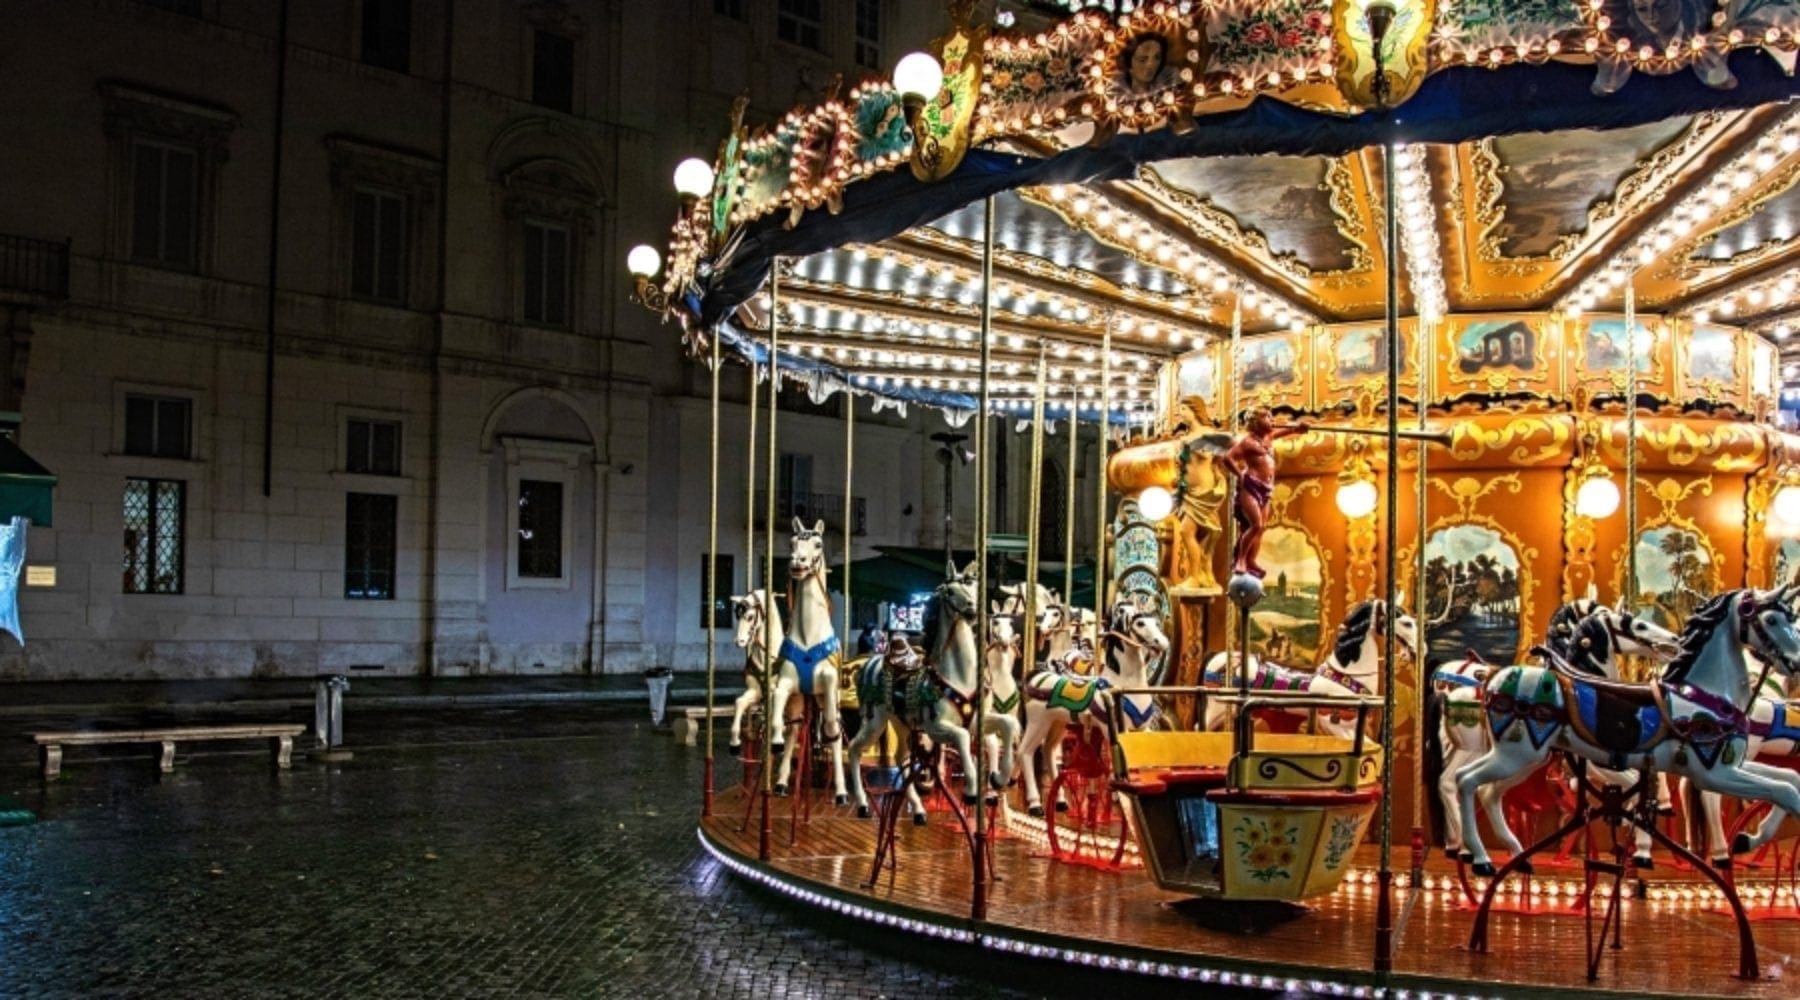 When Life’s Spinning Carousel Dulls Your Senses